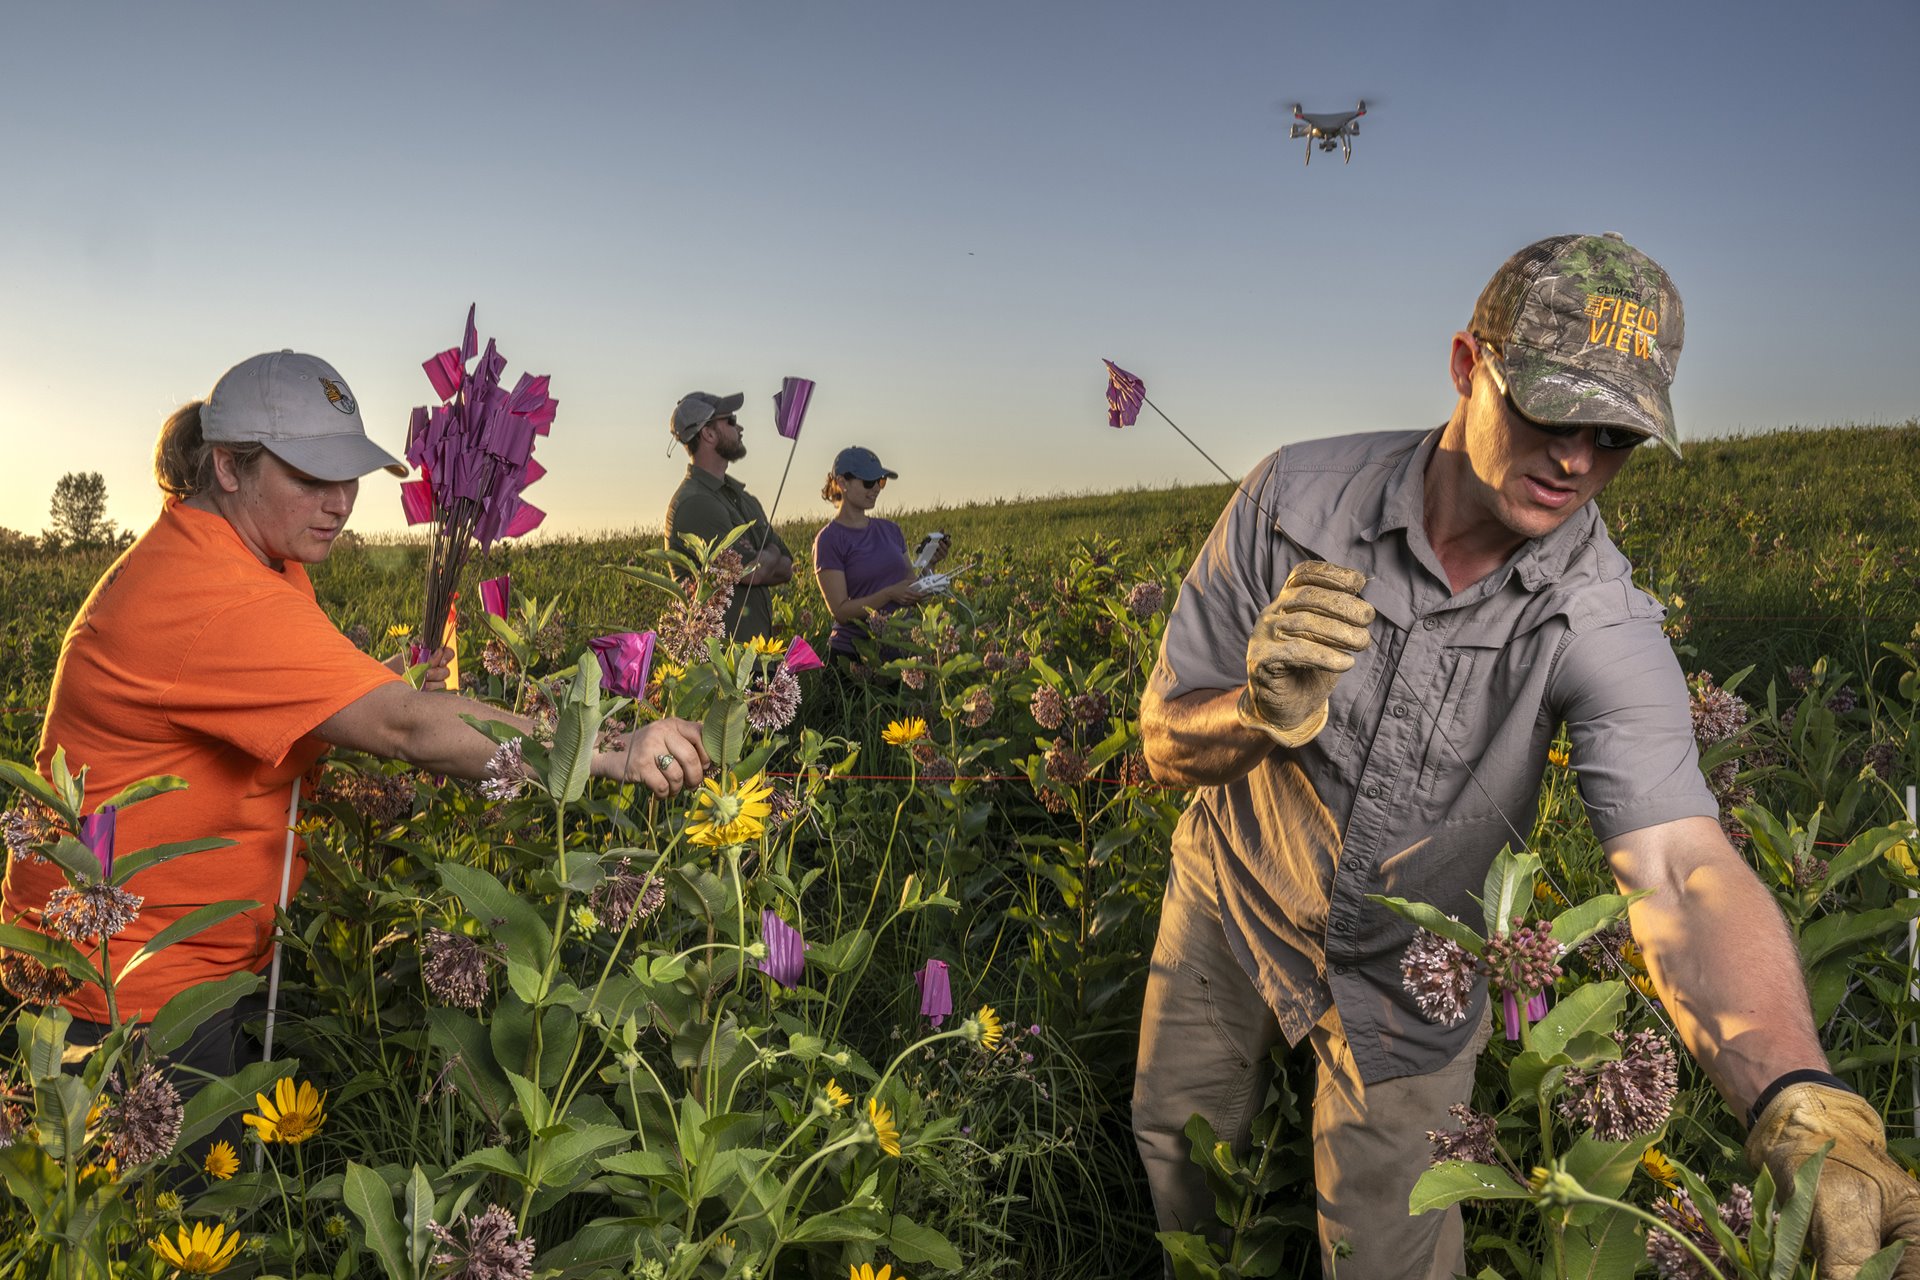 Wendy Caldwell and Timothy Fredricks (foreground) flag milkweed, as pilots Drew Smith and Christine Sanderson fly a drone to survey milkweed abundance in New Germany, Minnesota, United States. Once common, milkweed is rapidly disappearing from the prairies. Assessing and monitoring the existing population is key to plans to recover the monarch butterfly population.&nbsp;